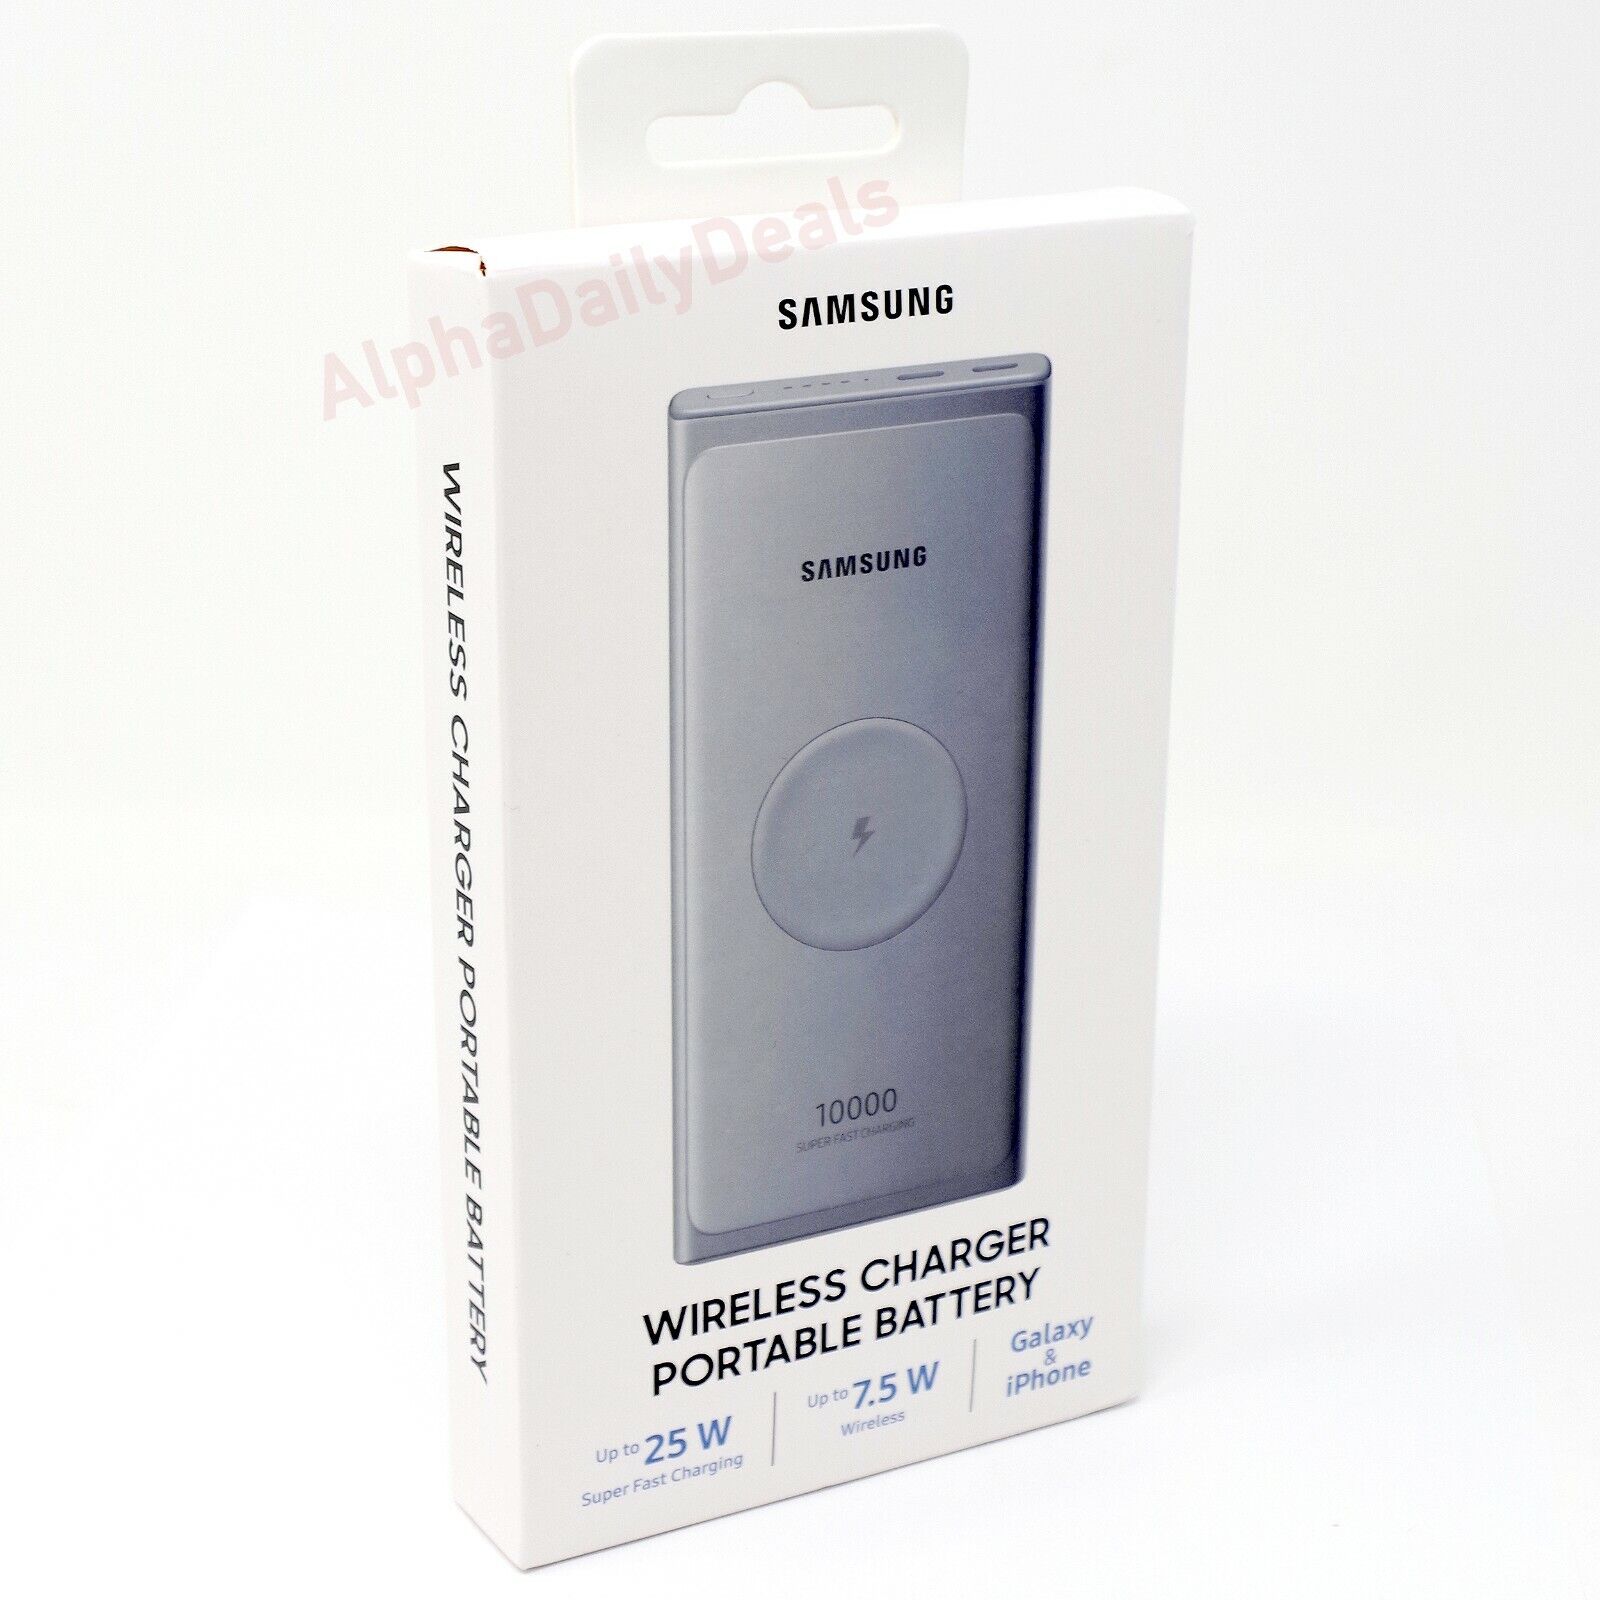 Samsung 25W Super Fast Qi Wireless Portable Charger for Galaxy Watch iPhone